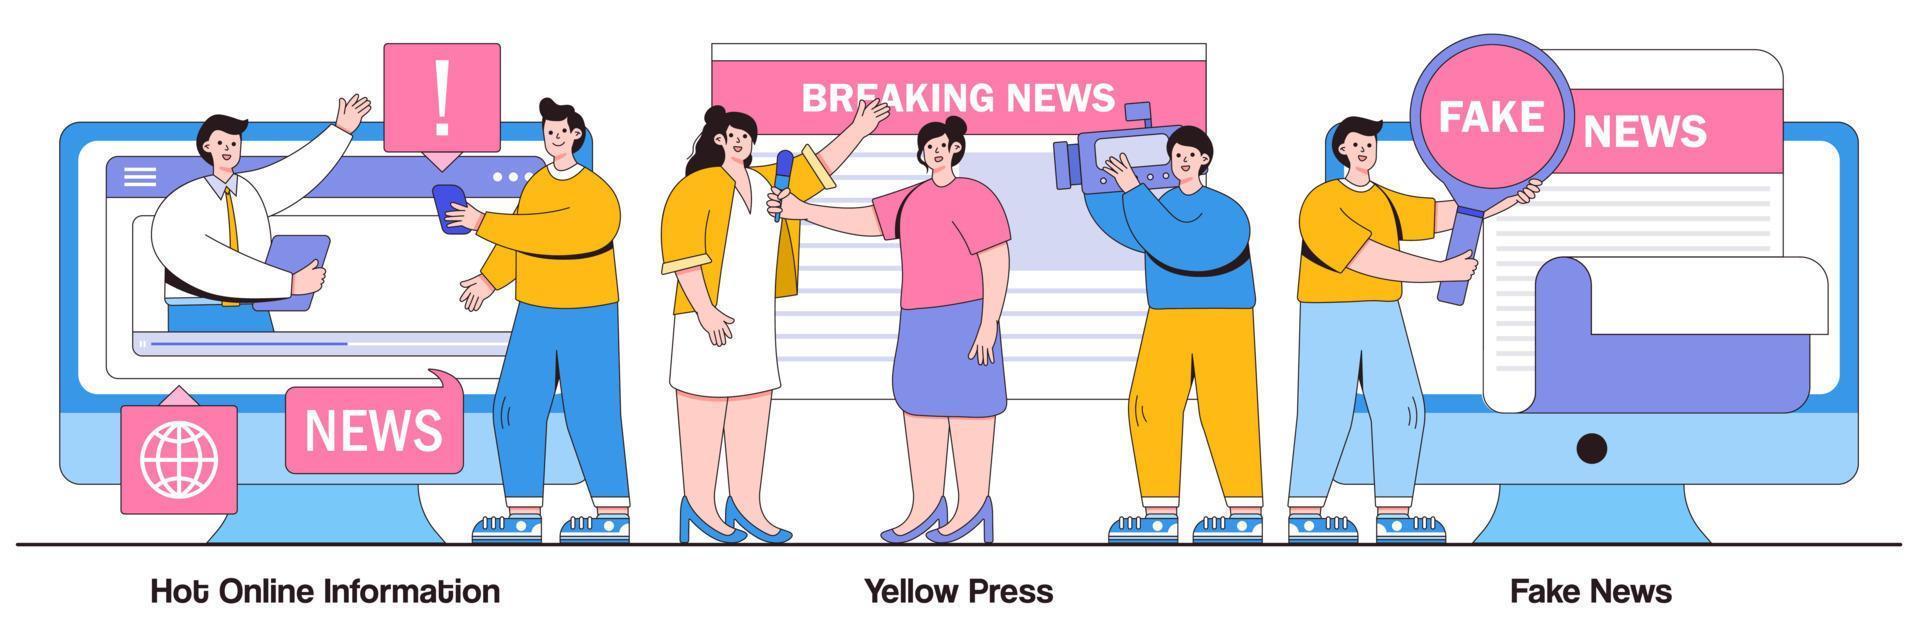 Hot Online Information, Yellow Press, and Fake News Illustrated Pack vector